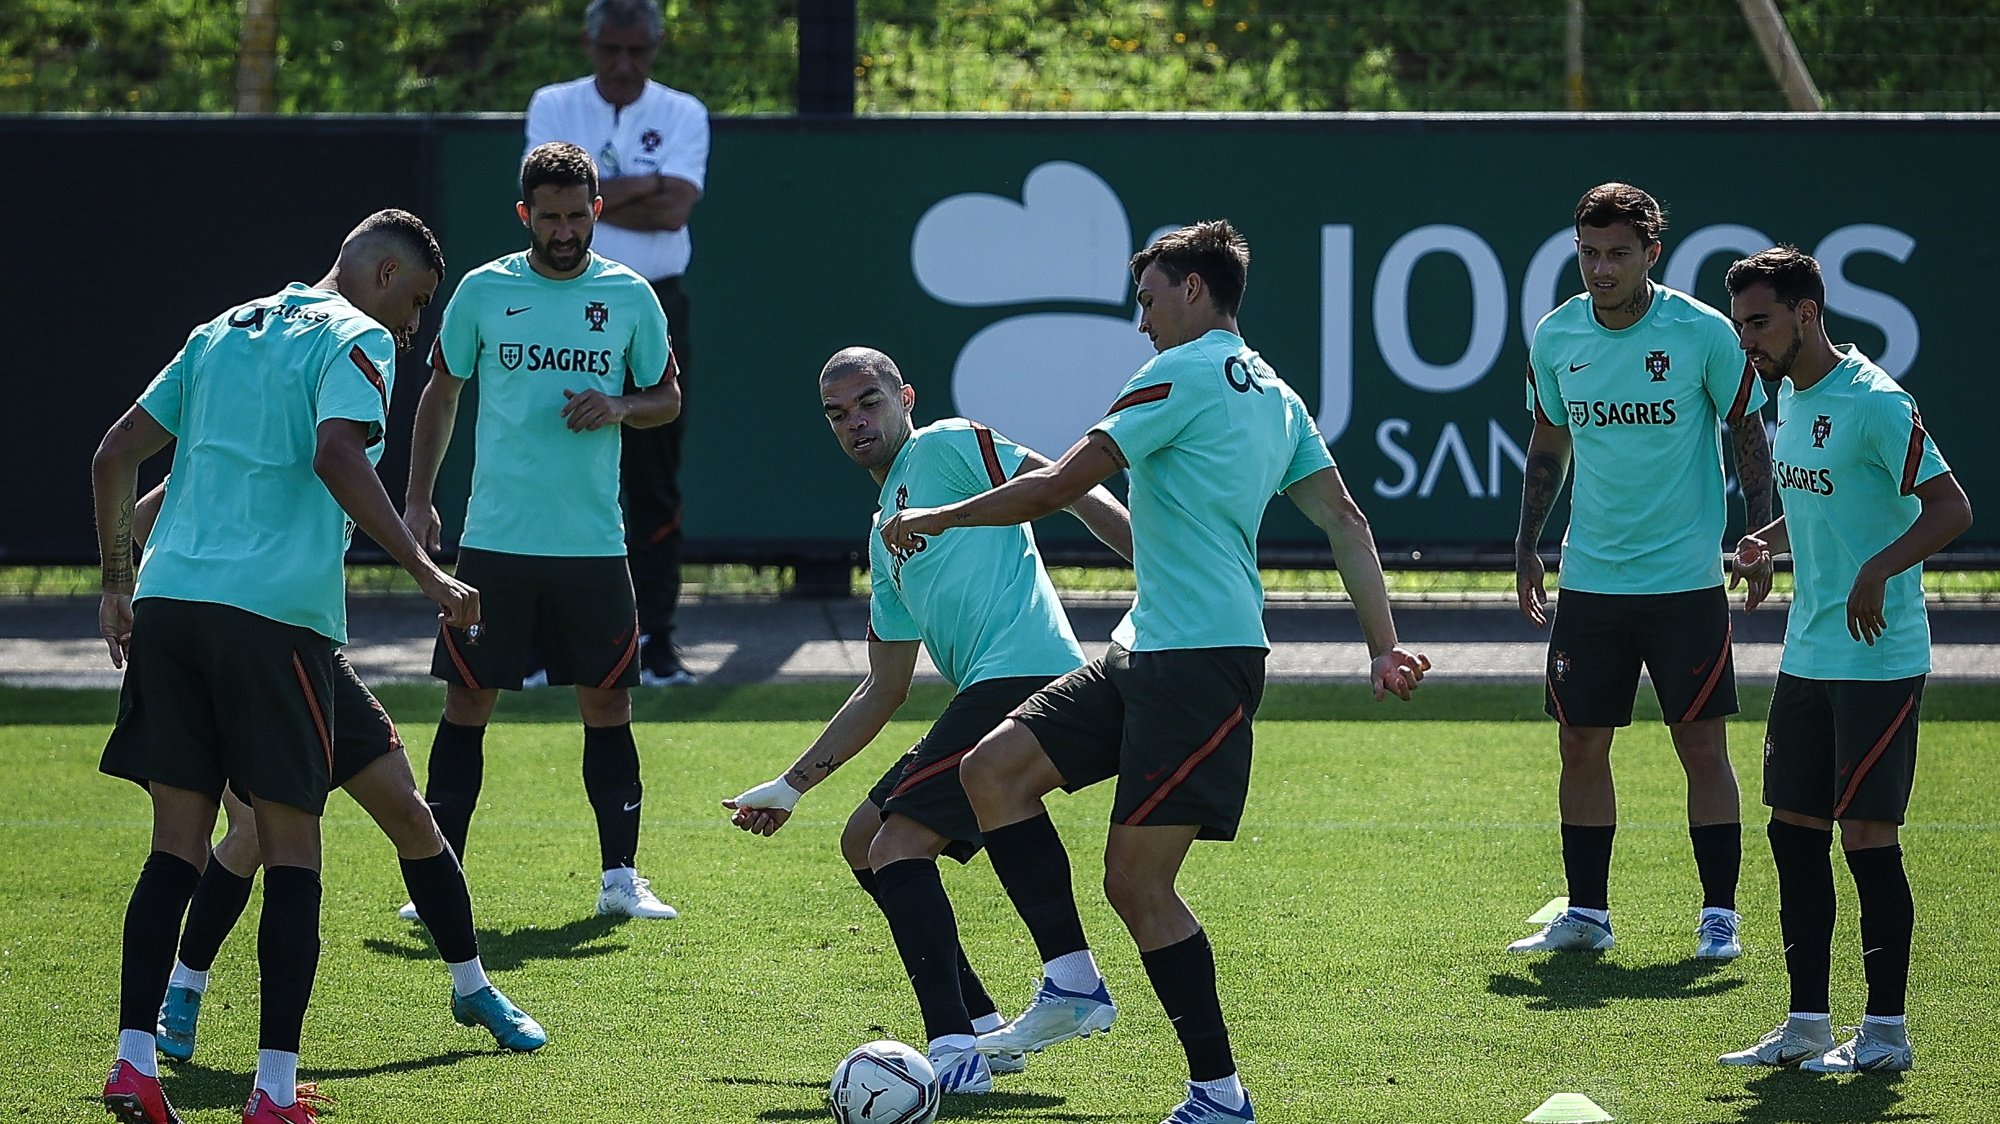 Portugal soccer team players warming up during a training session at Cidade do Futebol in Oeiras, outskirts of Lisbon, Portugal, 11 June 2022. Portugal will play against the Switzerland on June 12th for the upcoming UEFA Nations League. RODRIGO ANTUNES/LUSA